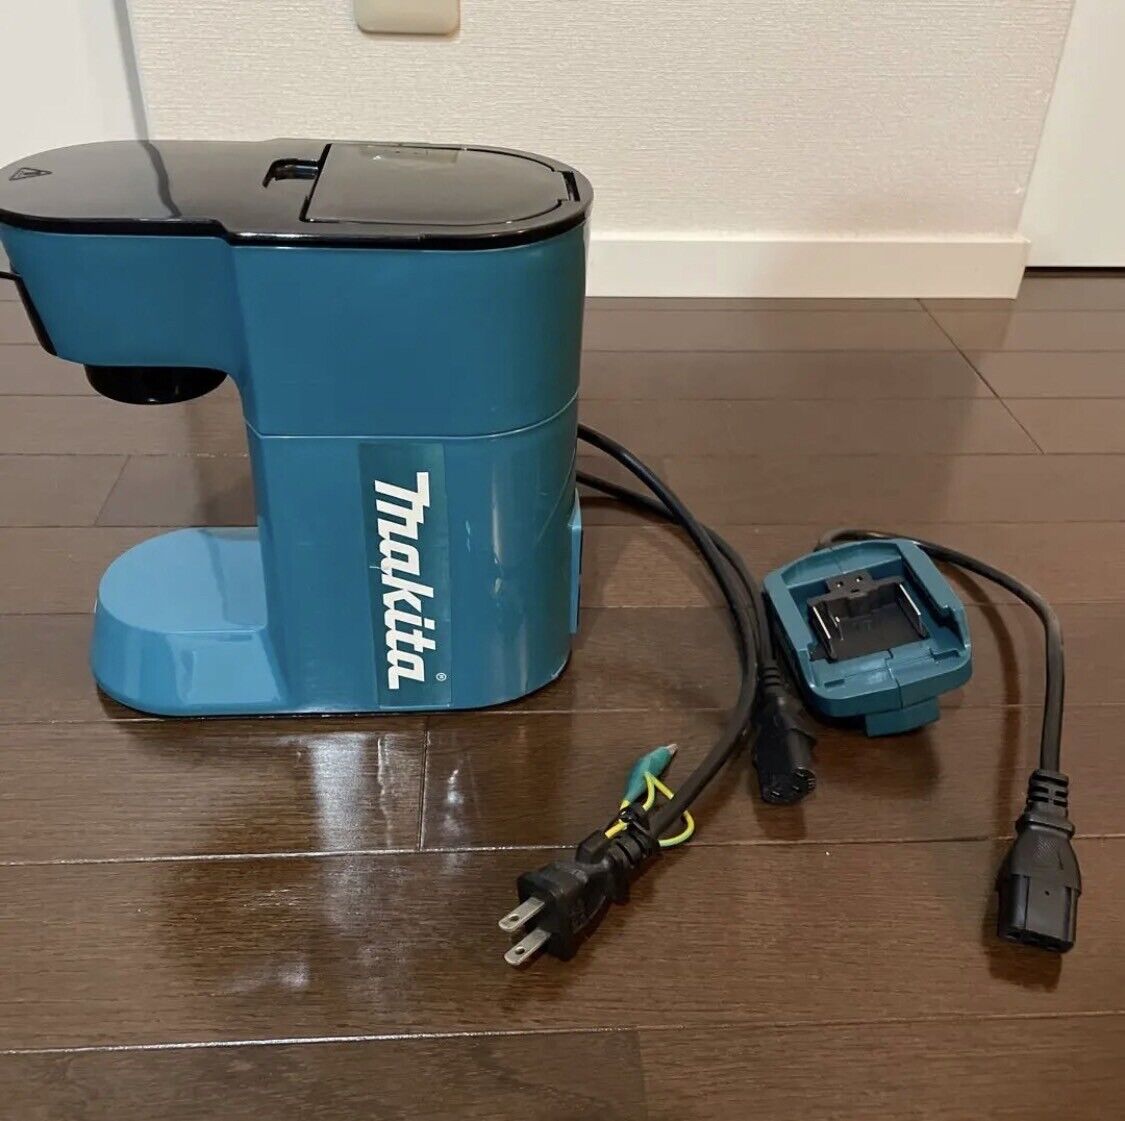 CM500DZ USED Makita 18V Rechargeable Coffee Maker BODY ONLY AC100V USED